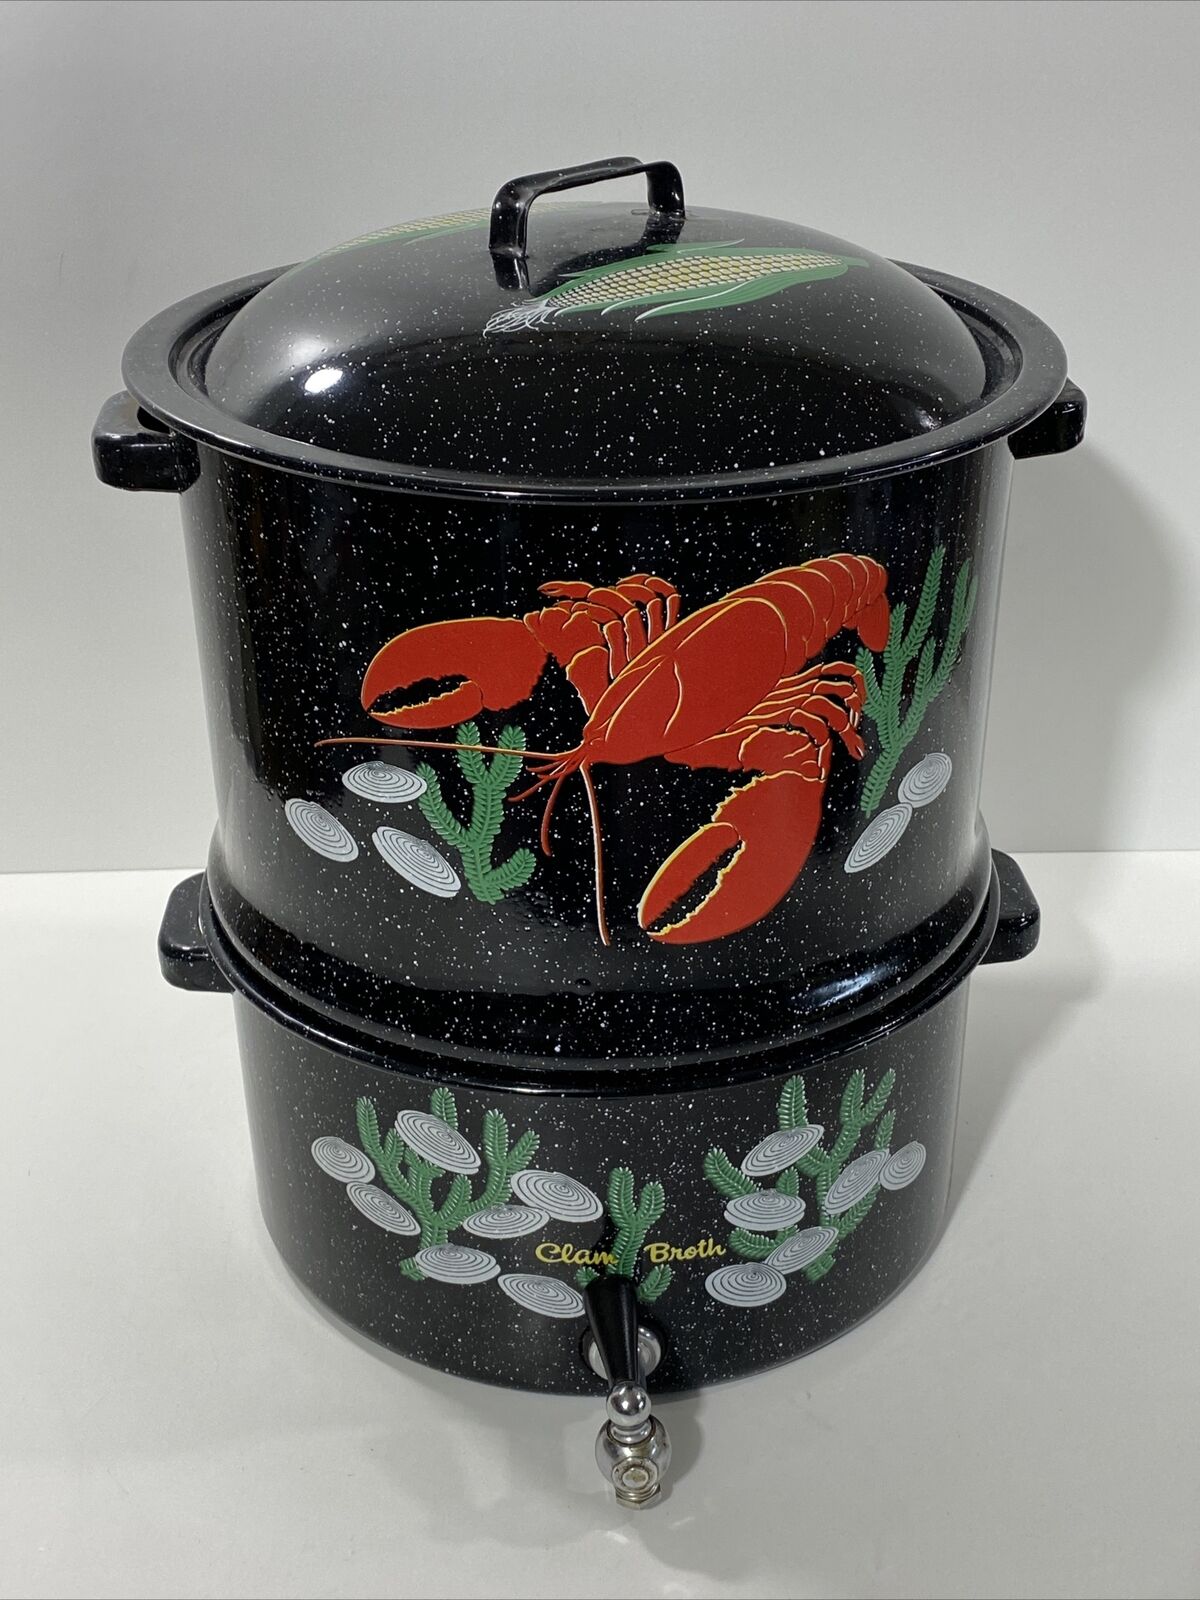 Vintage Speckled Black Enamel Savory Steamer Pot Lobster Clams Corn with Spout 100% nowy, obfity